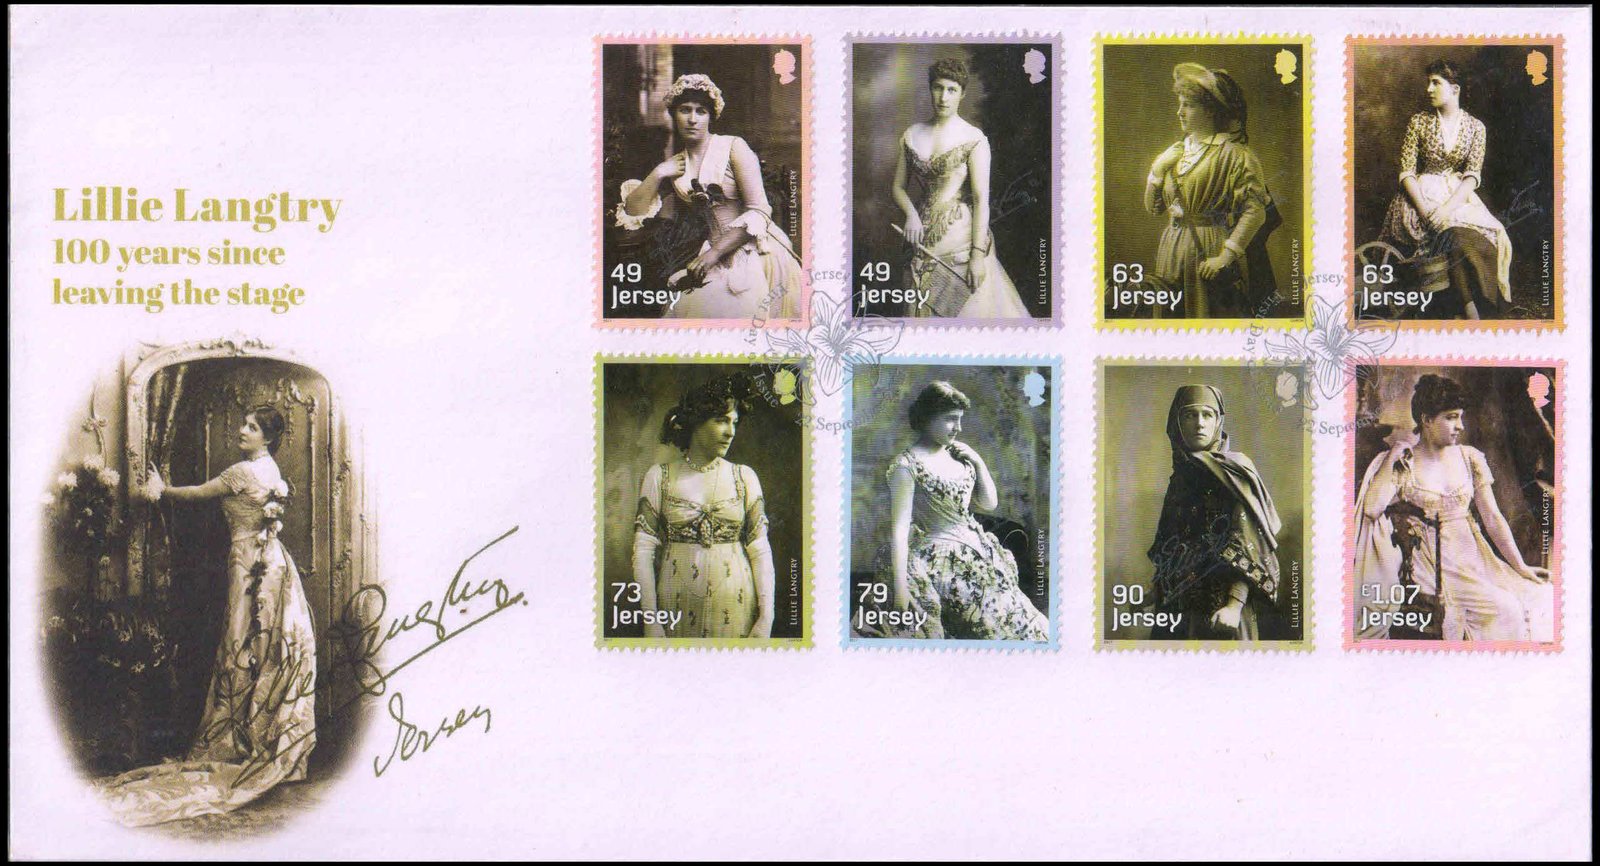 JERSEY 2017-Lillie Langtry, Actress-Film Cinema, Set of 8 on F.D.C, Face $ 6-S.G. 2192-2199-Cat £ 6-